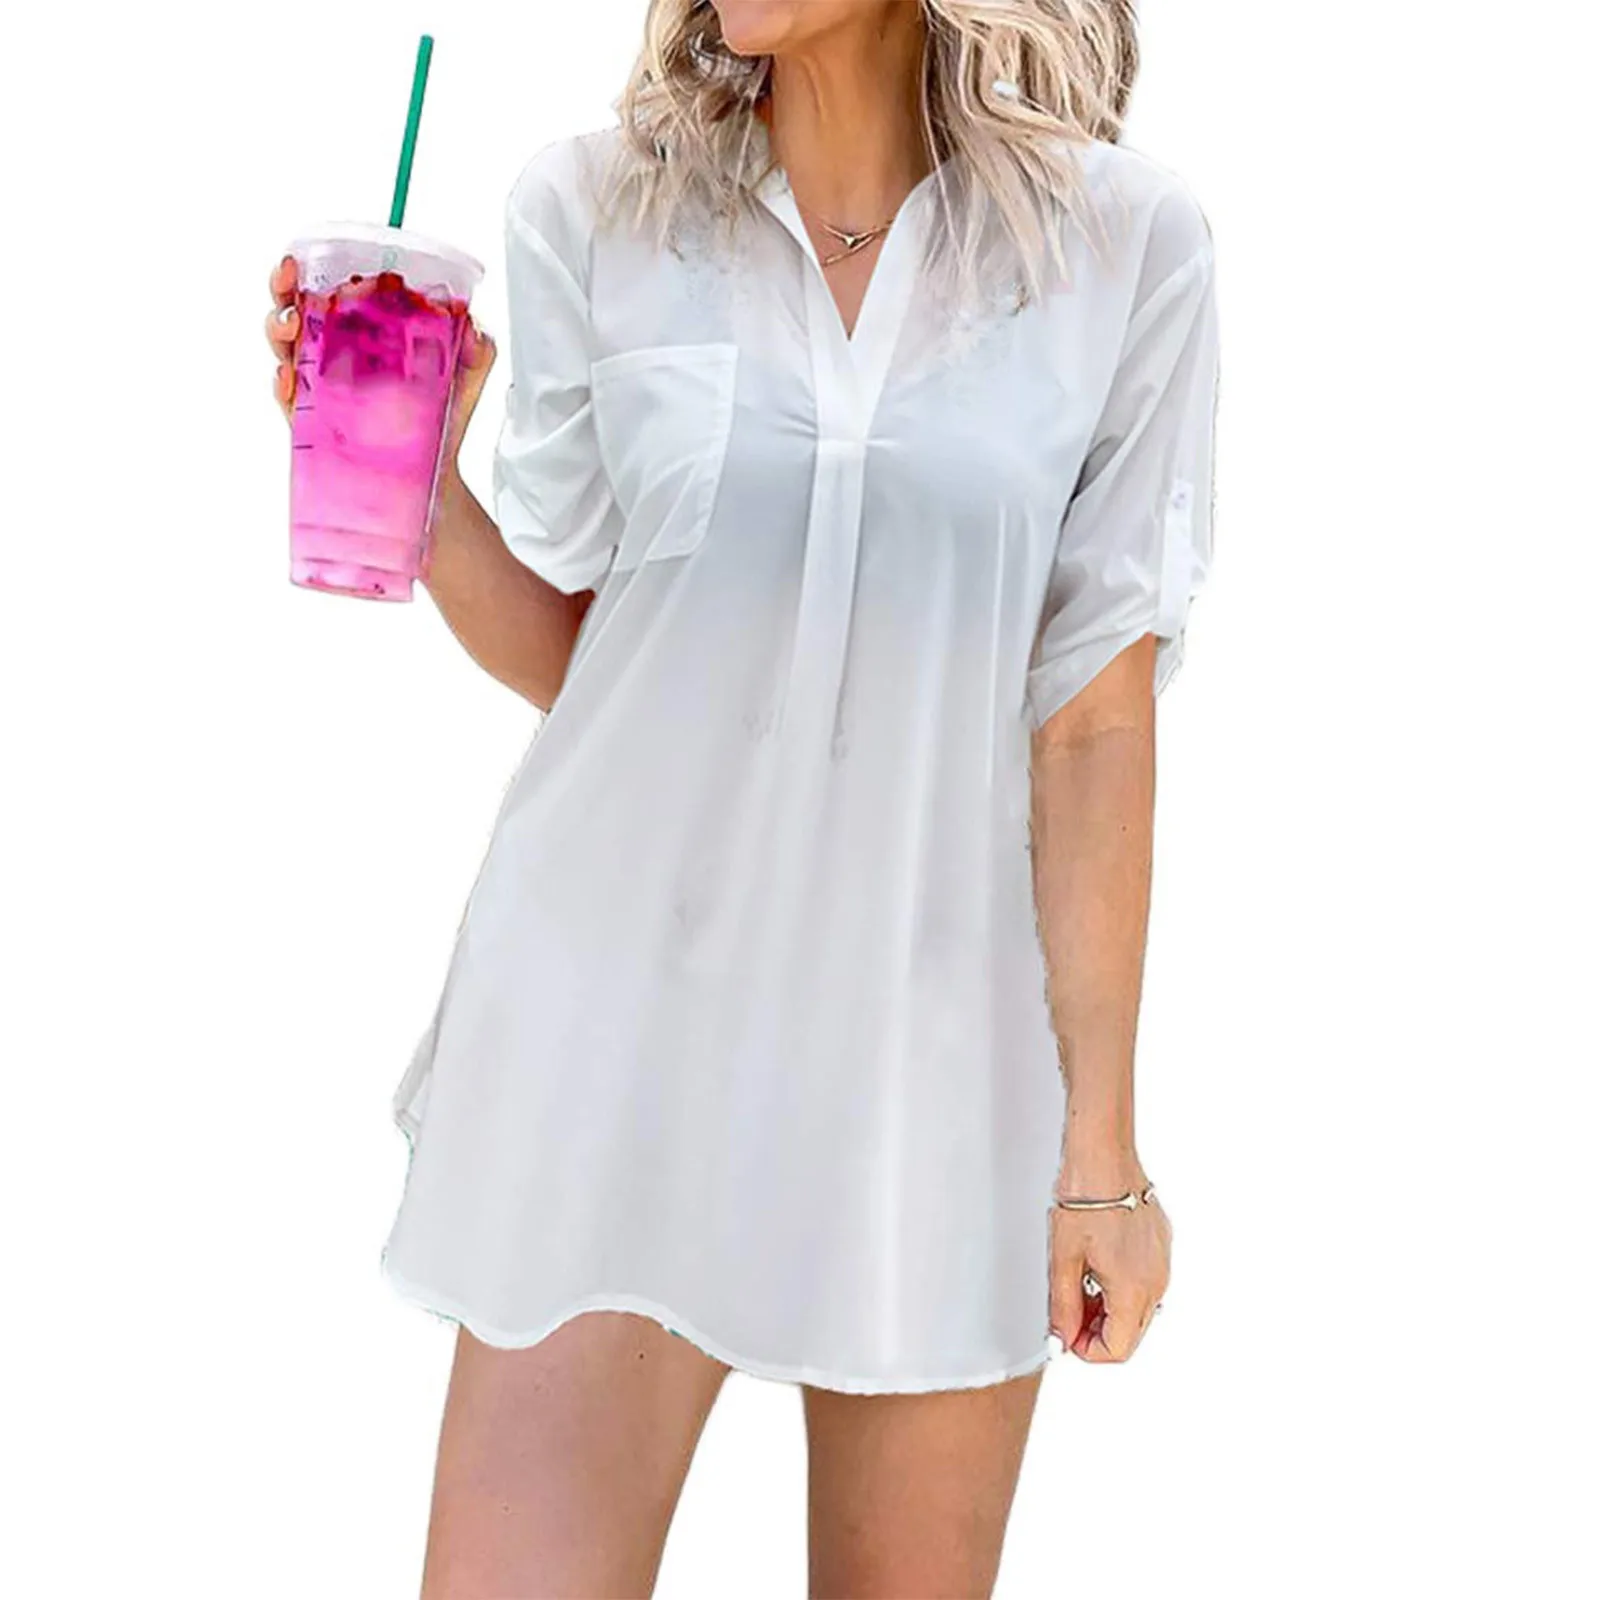 Women's Bikini Cover-up Sexy Swimsuit Cover Ups Summer Bathing Suit Beach Coverups Beach Casual Dress Tops Купальник Женский bathing suit wrap cover up Cover-Ups